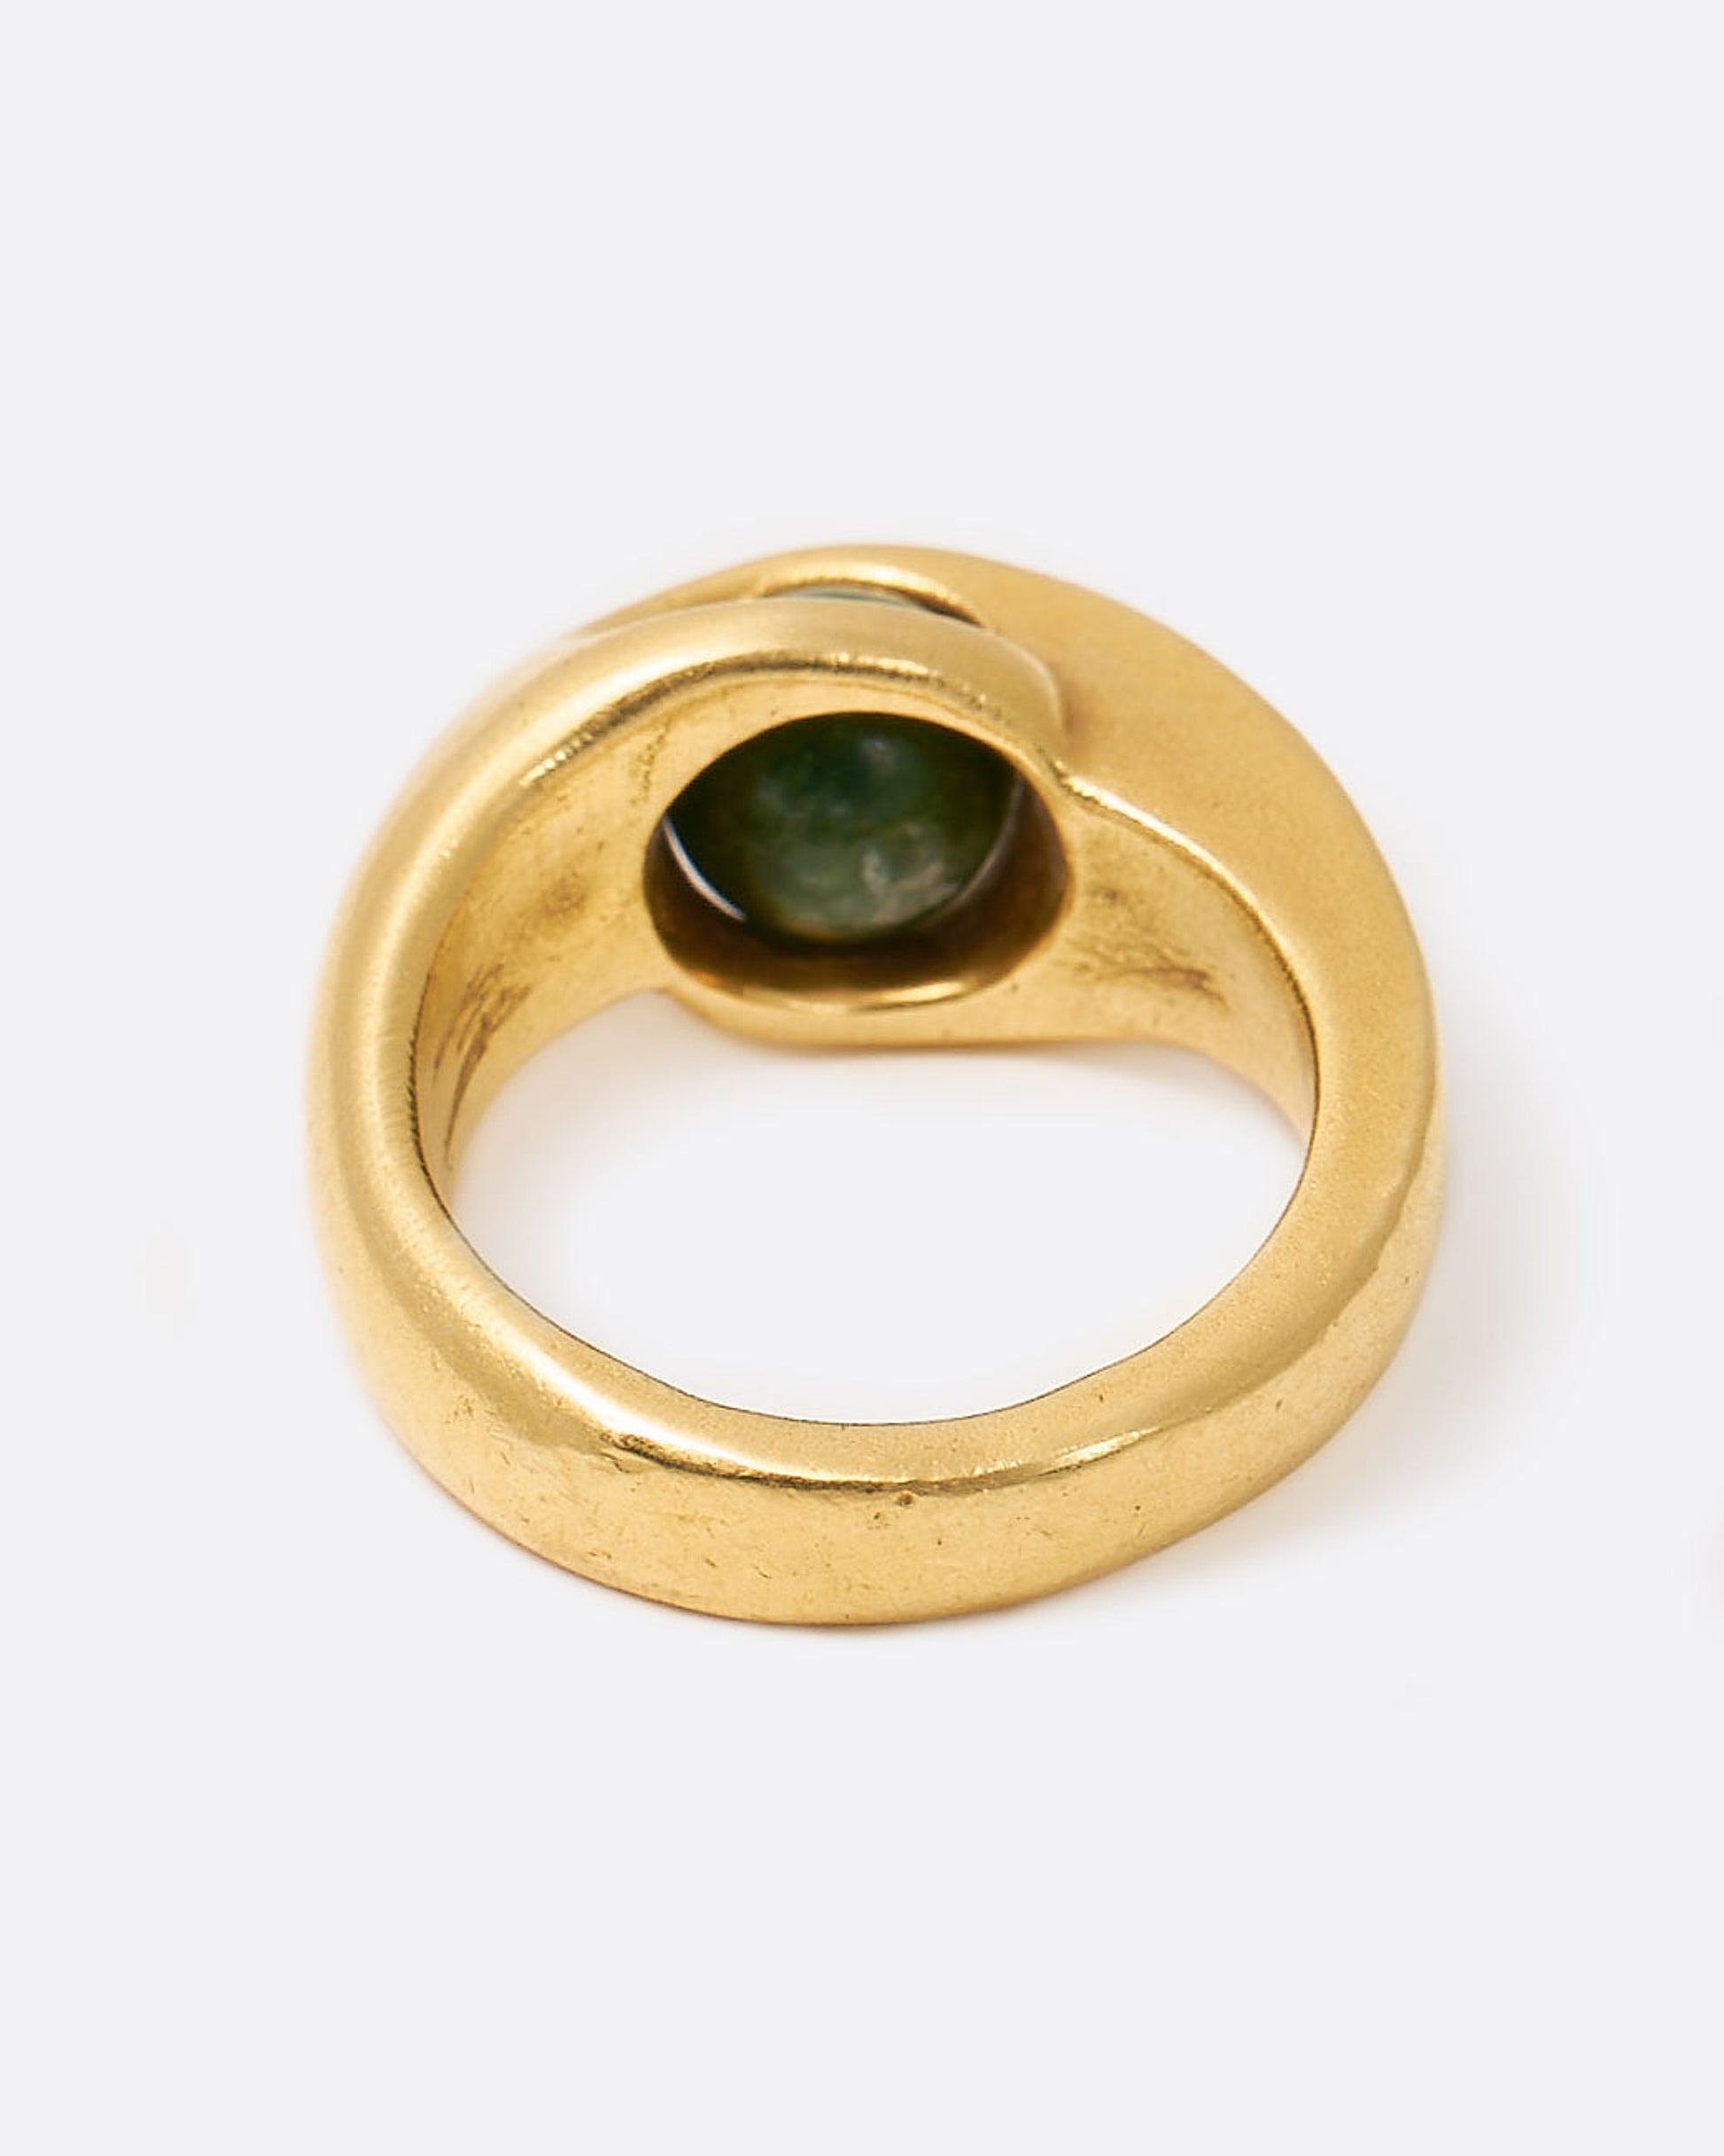 Yellow gold ring with floating green sodalite sphere, shown from the back.